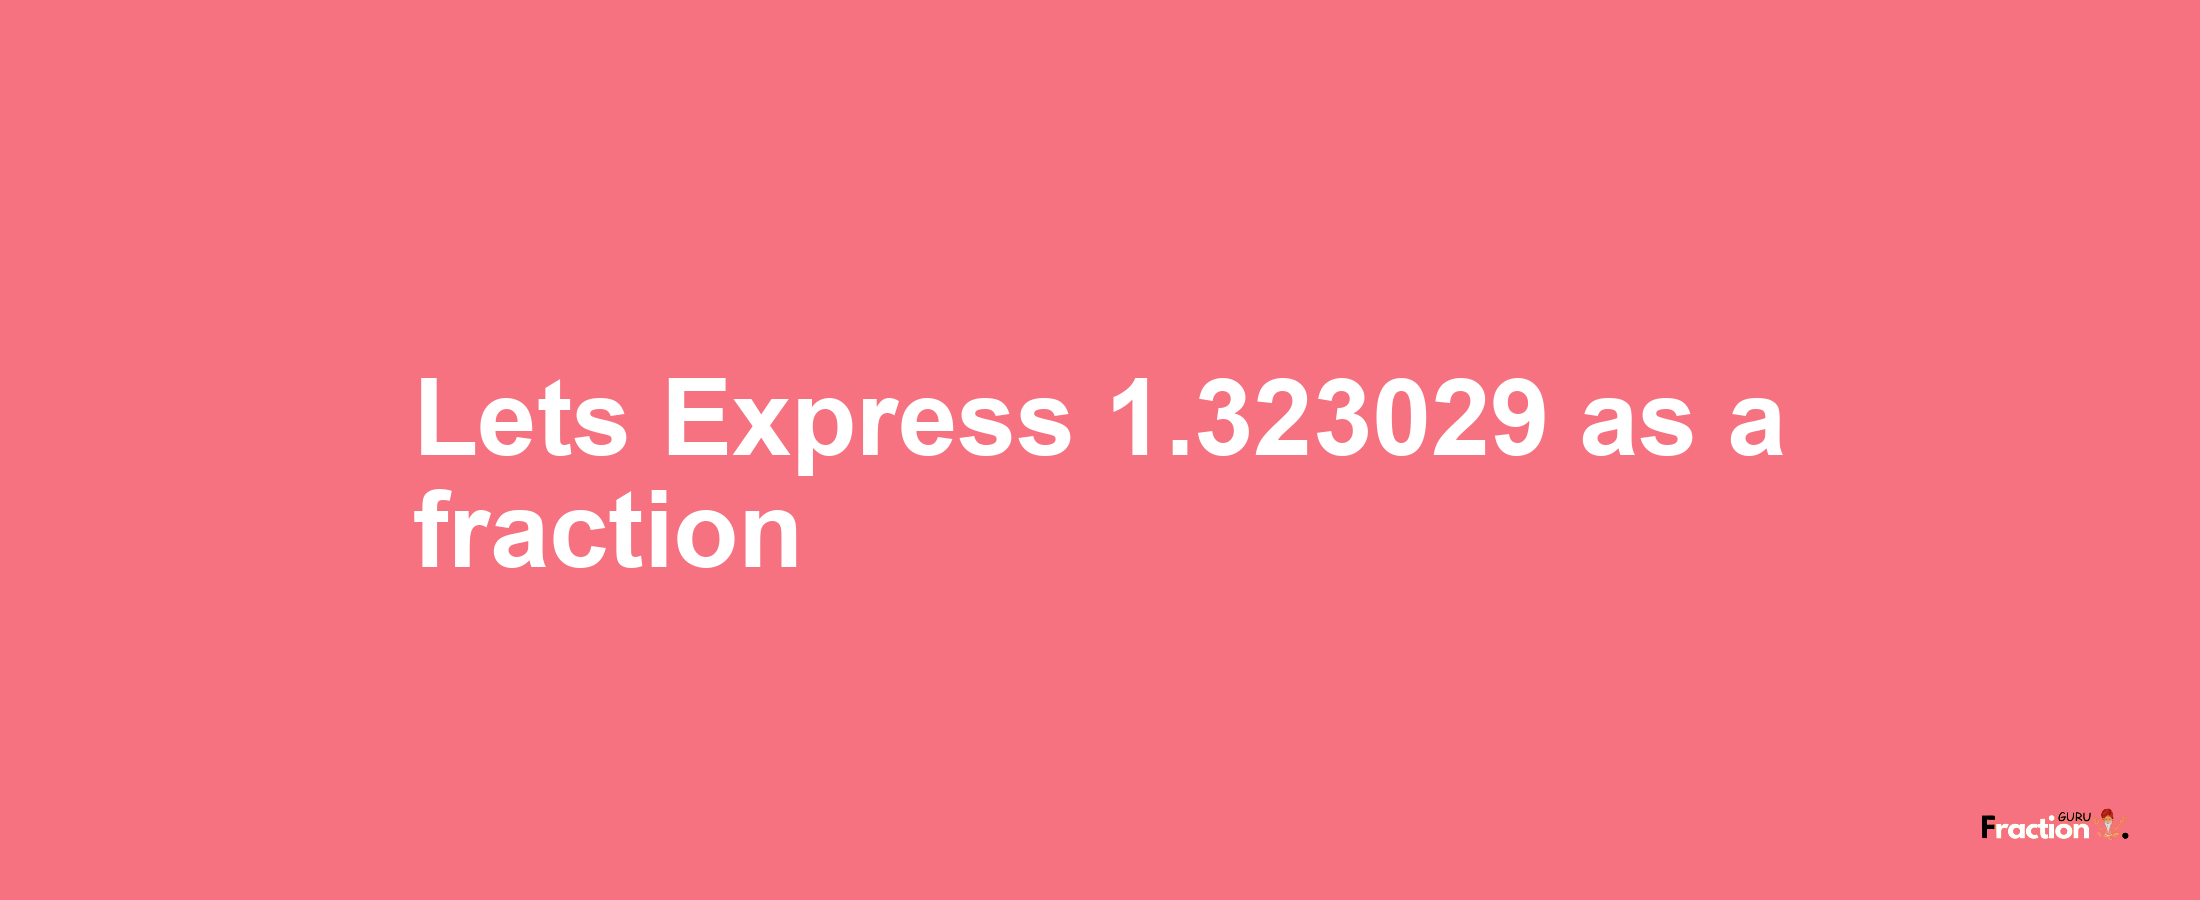 Lets Express 1.323029 as afraction